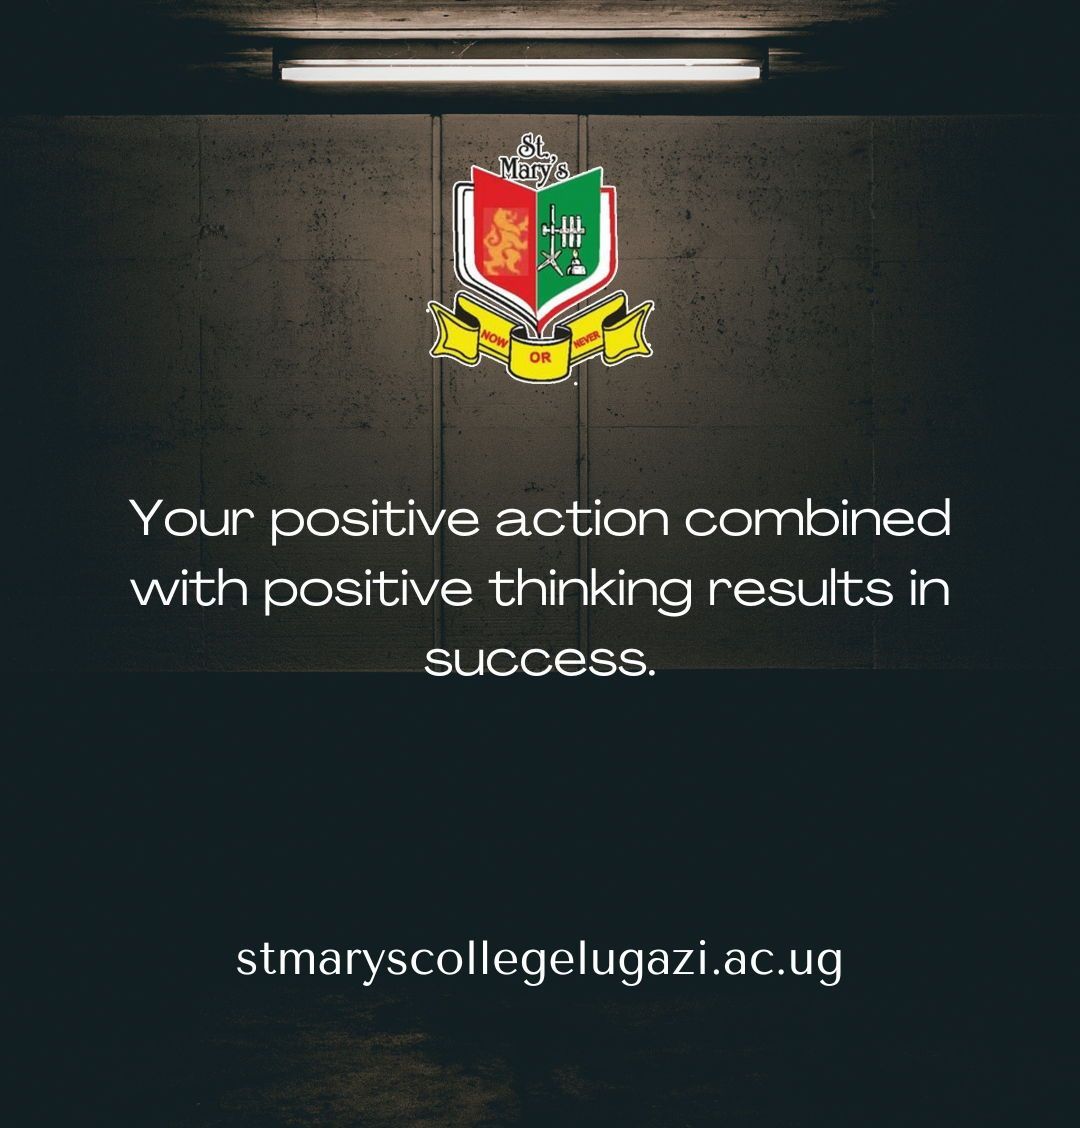 'Your positive action combined with positive thinking results in success. ' #StMarysCollegeLugazi #GratefulForEducation #Educationalforall #Empower #DreamsComeTrue #KnowledgeIsPower